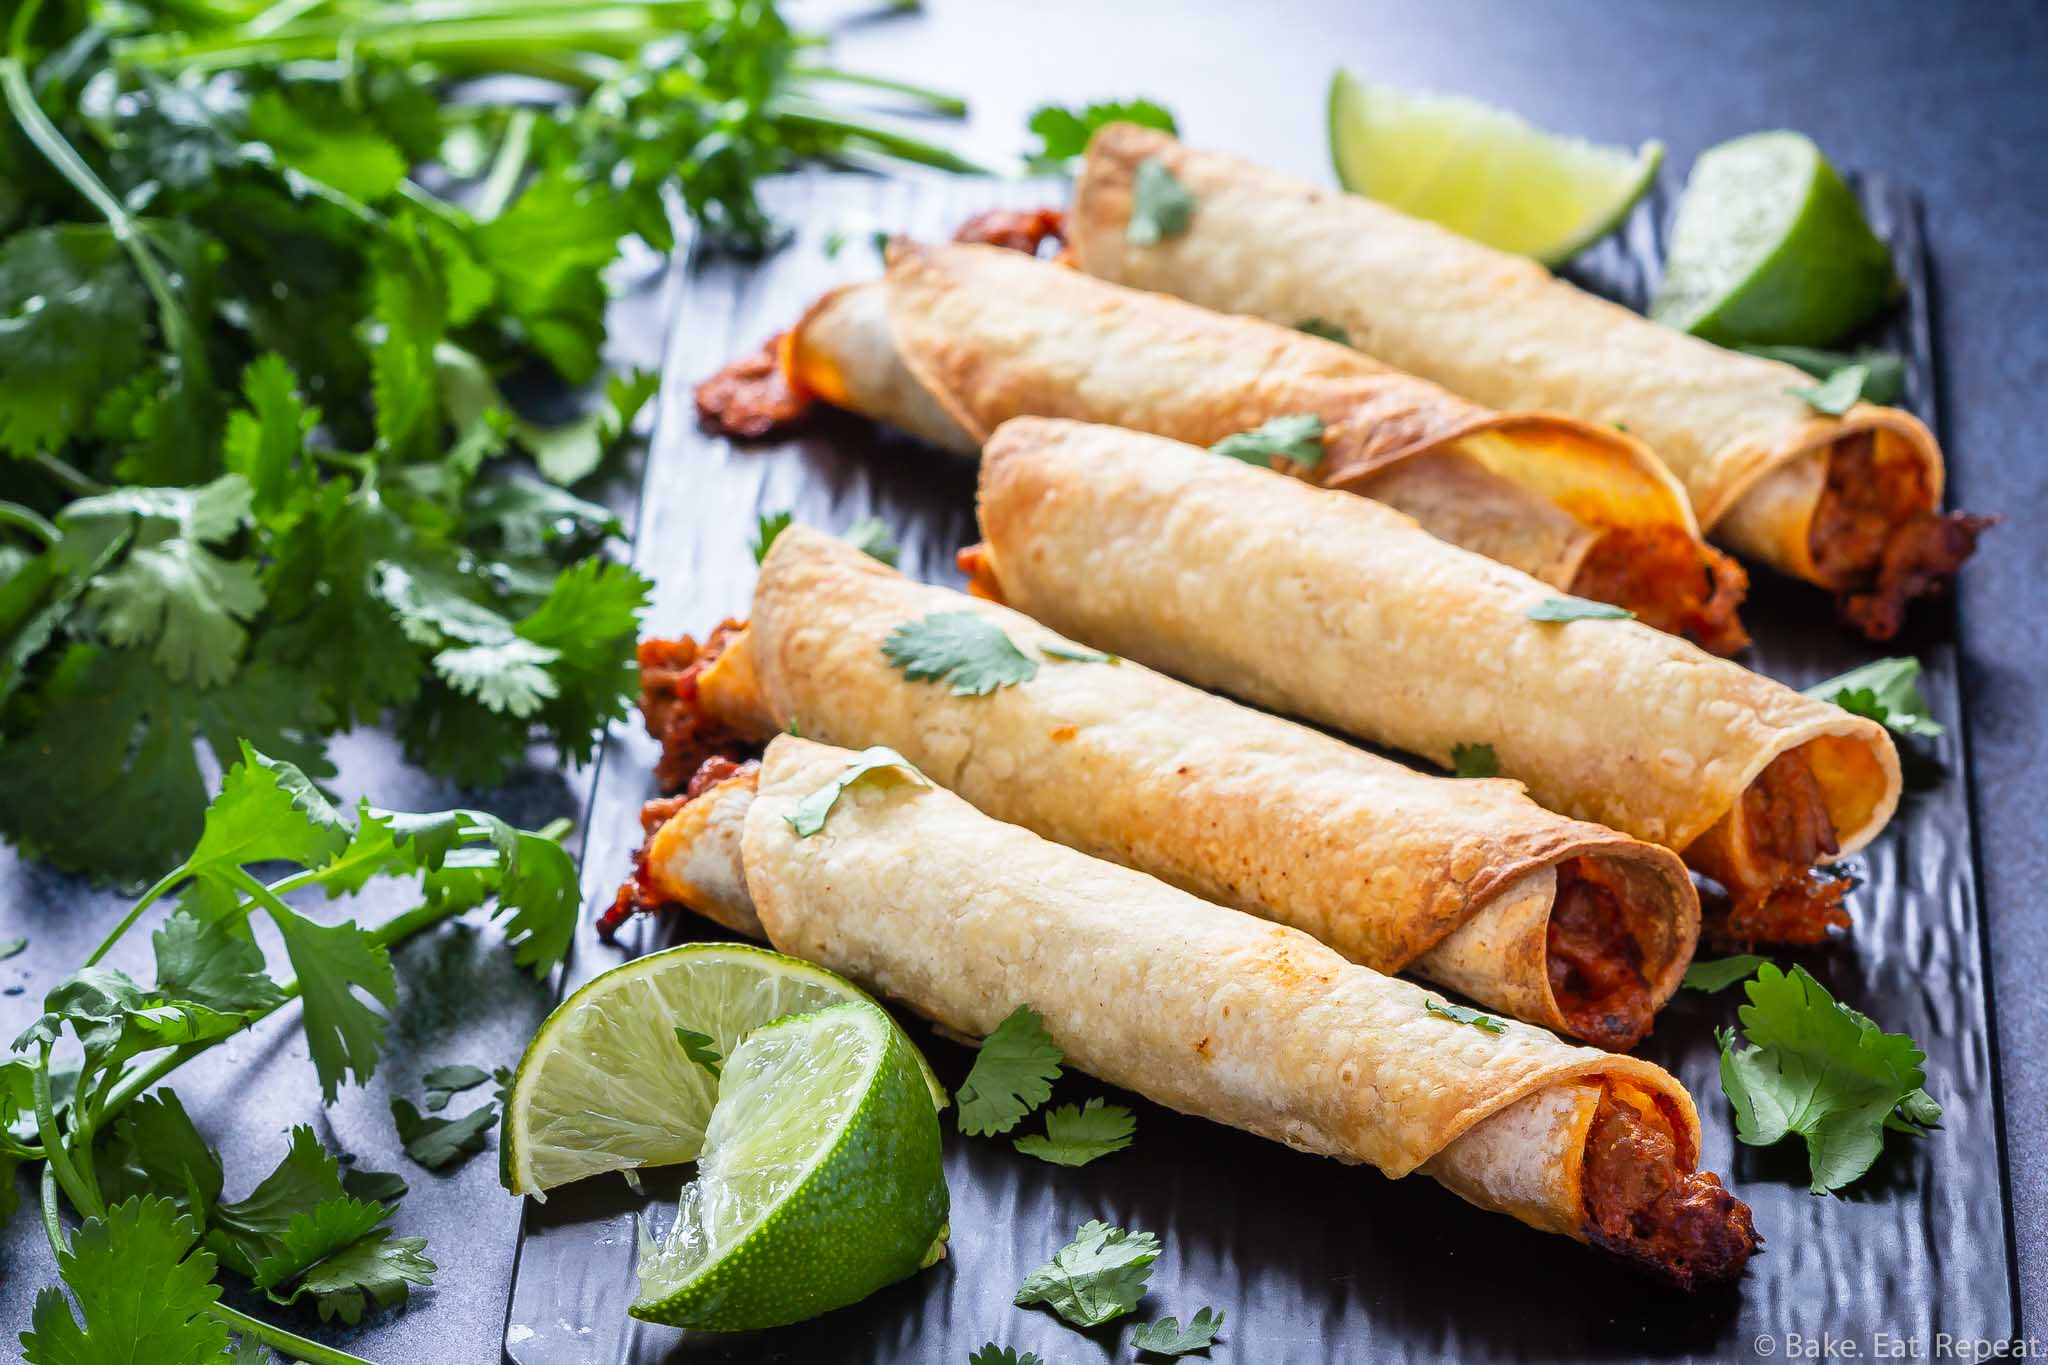 Baked Taquitos - Bake. Eat. Repeat.